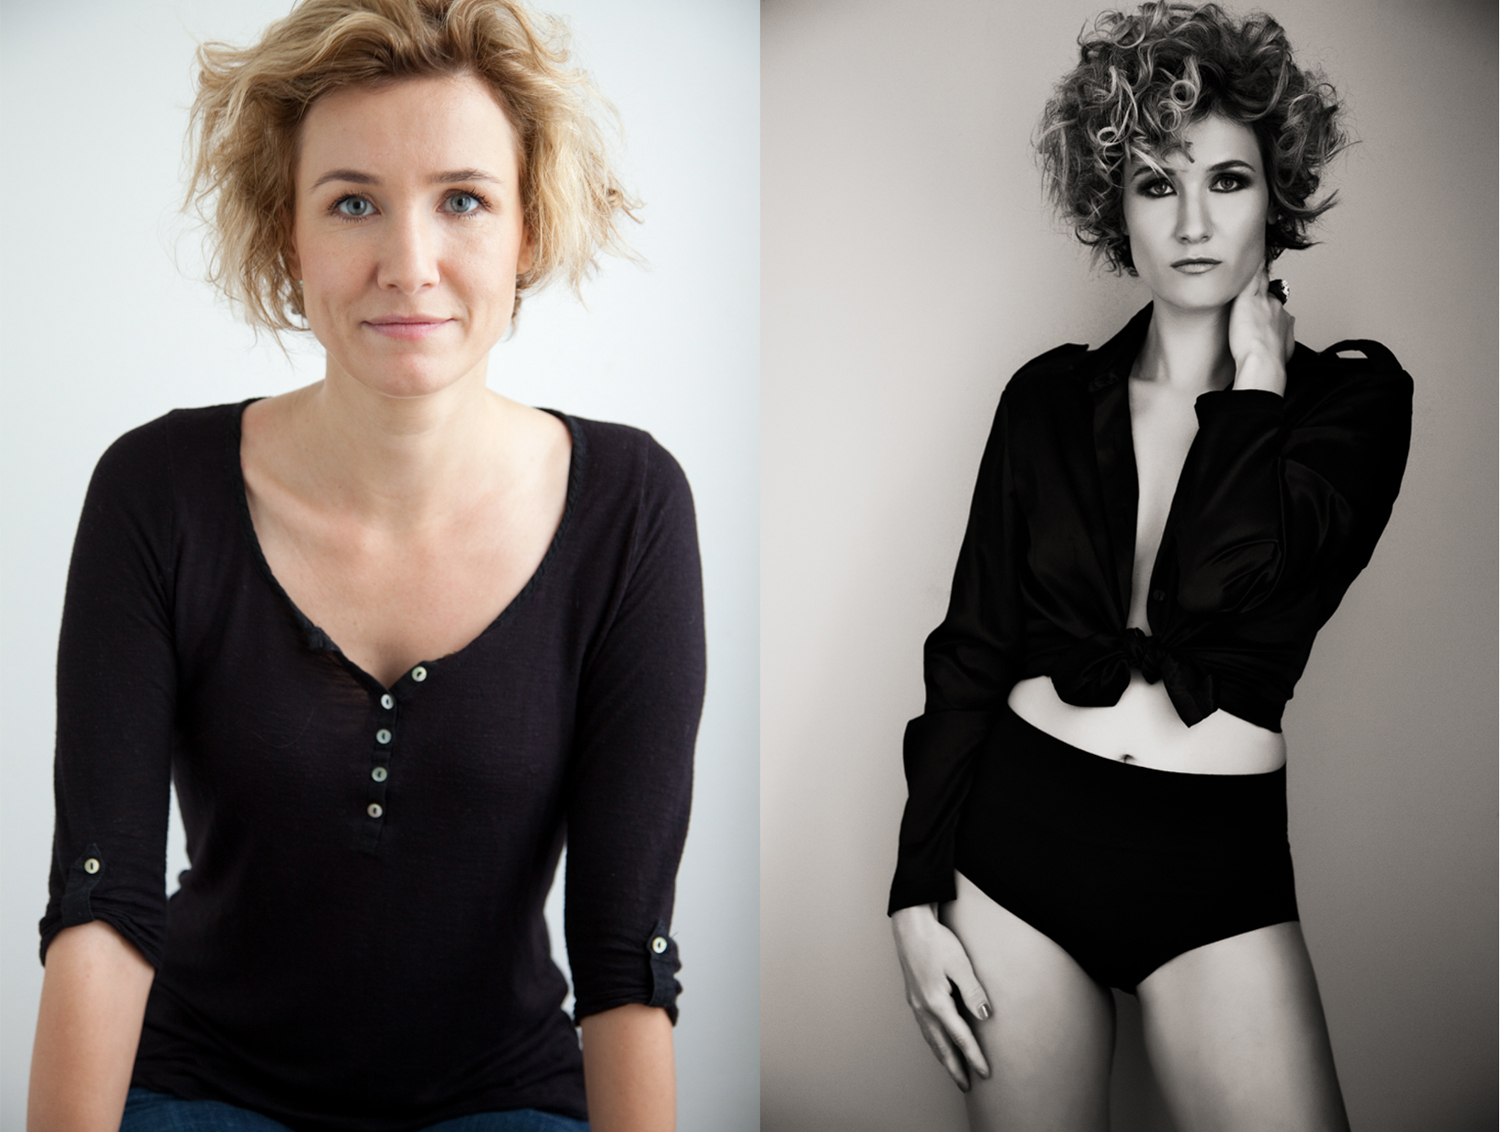 Before makeover and after professional hair and makeup photo or female model with short curly hair